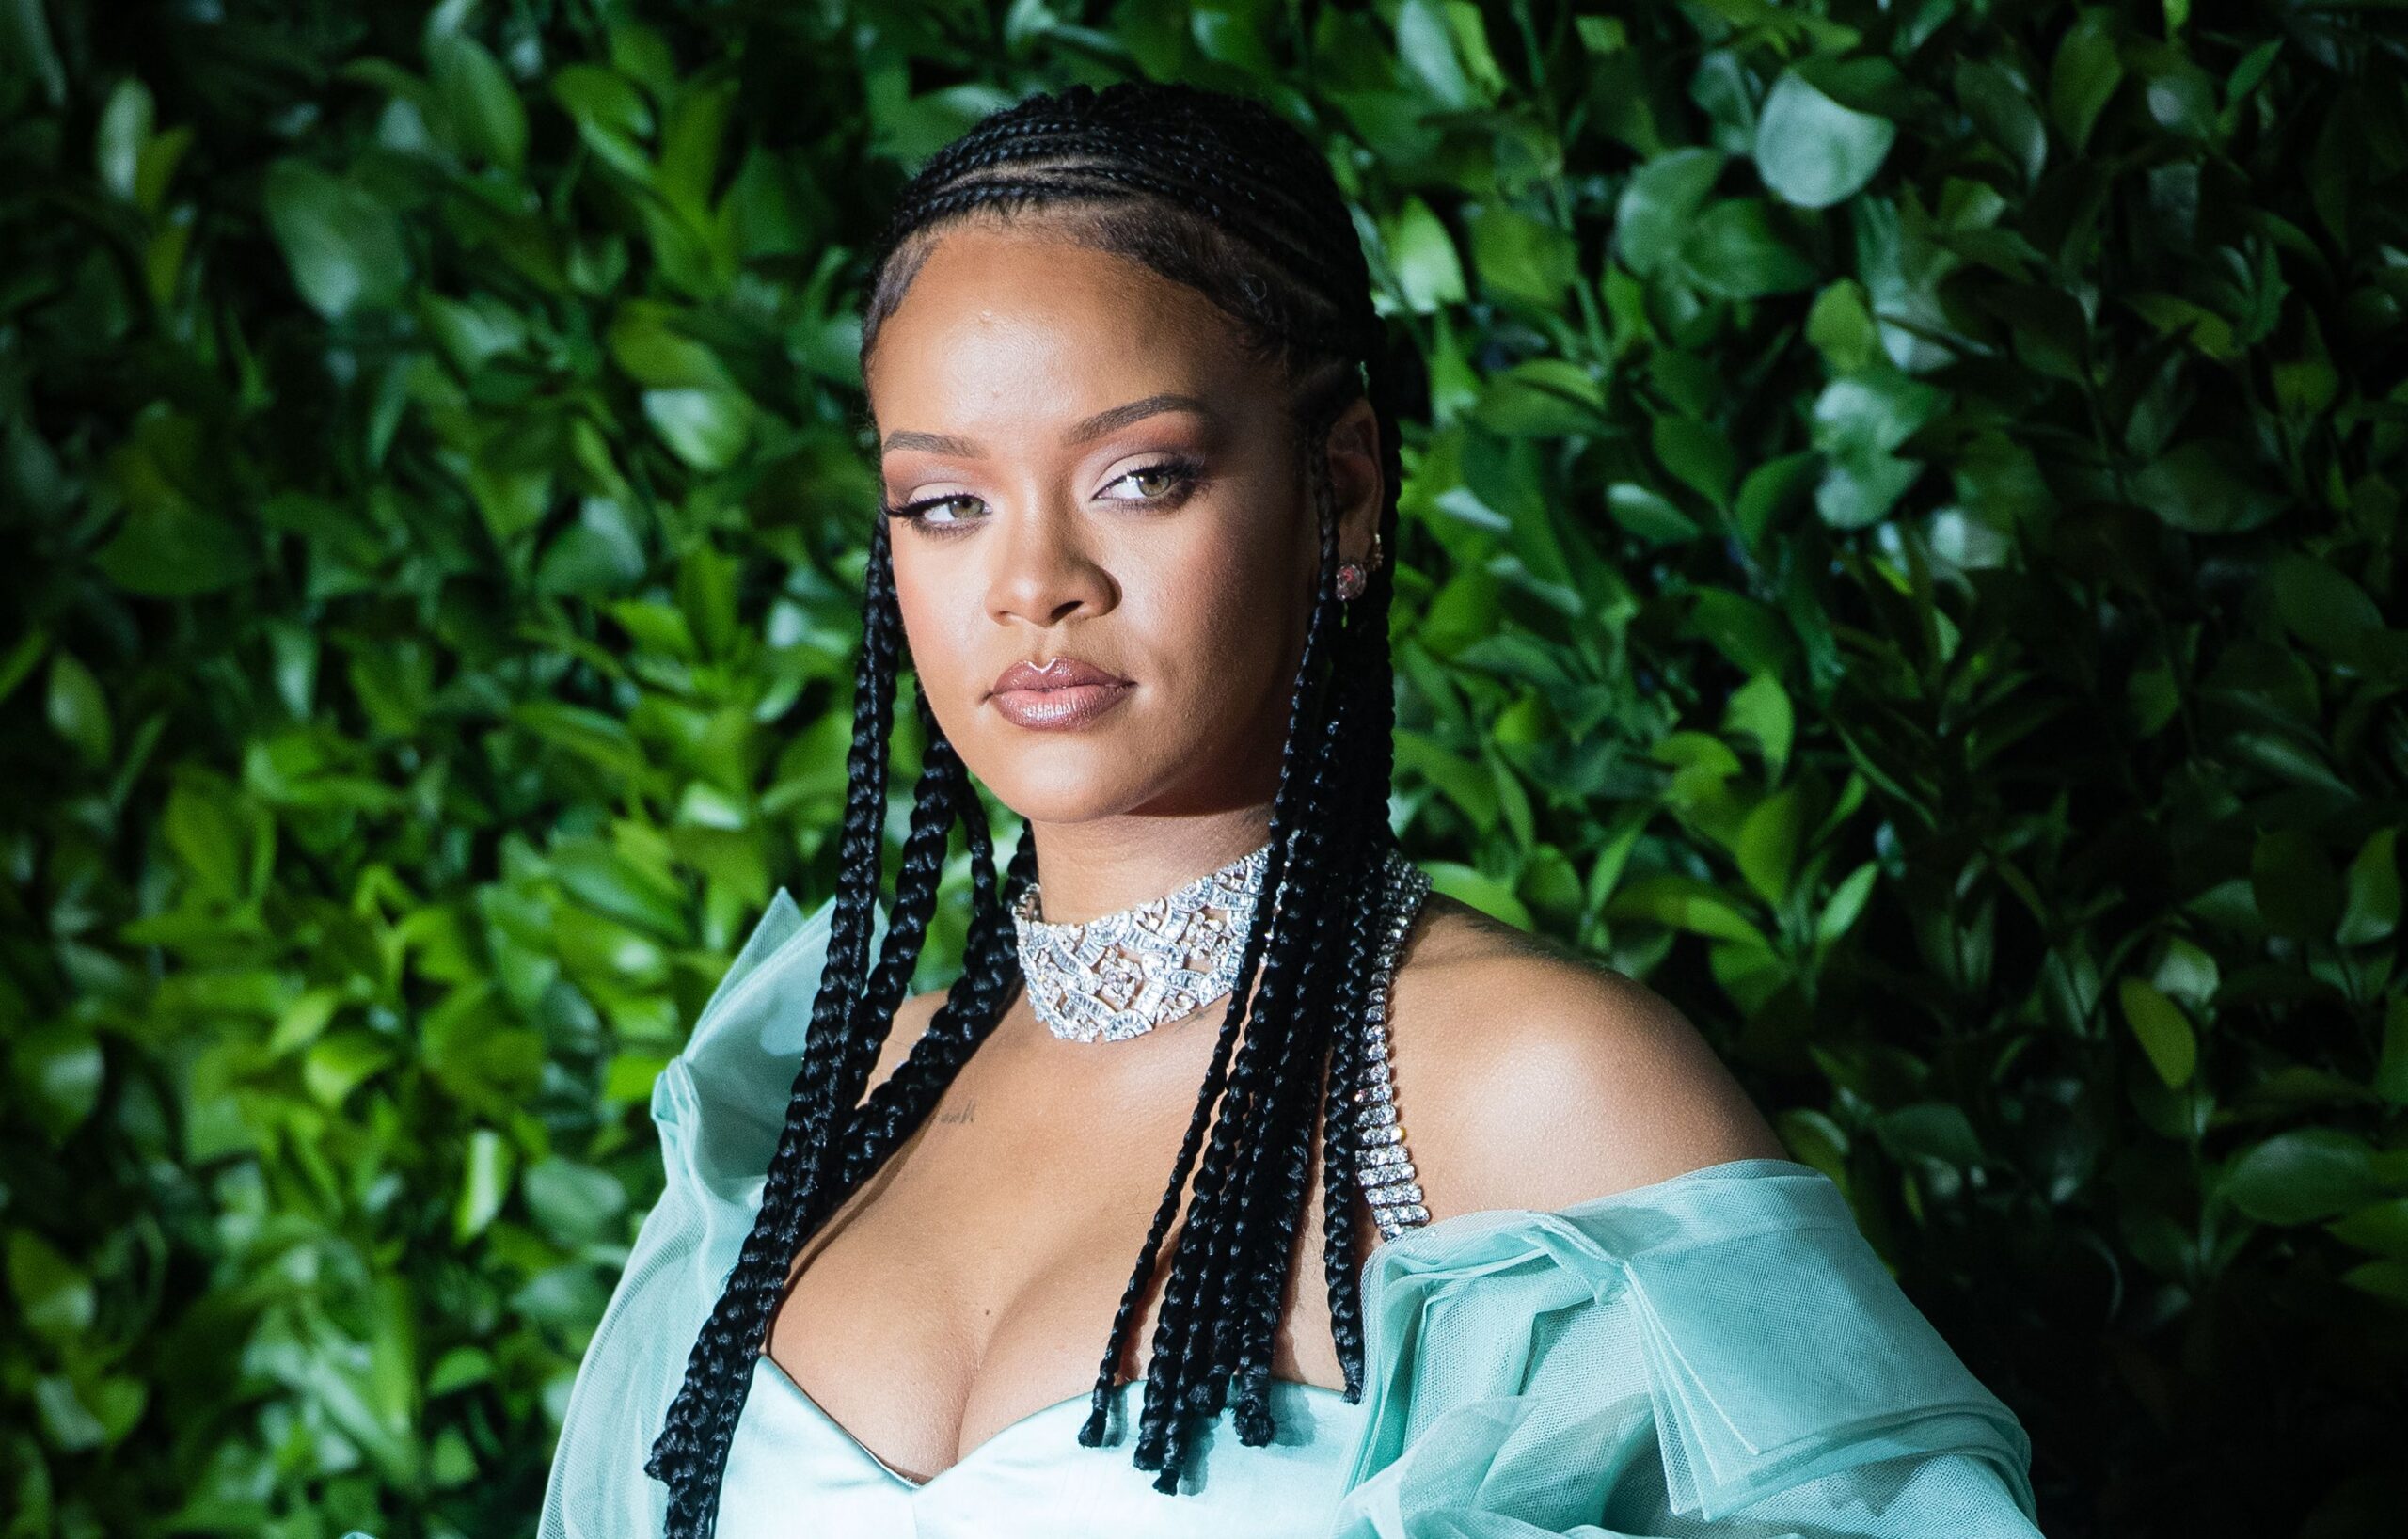 Rihanna has sparked the outrage in Muslim Community with the use of Islamic Hadith in the lingerie show. As per the details, Rihanna has come under fierce criticism for her song had a remix of an Islamic Hadith. The lingerie models danced on this song at a fashion show. The story went trending all the way on social media, specifically on Twitter. However, Rihanna has now apologized to the Muslim Community for her unintentional yet offensive mistake. Here we have got further details on this story! Muslims Bash Rihanna for Using Hadith in Song According to the details, Rihanna, who is a famous singer and now turned into a designer, has faced an extreme backlash following remixing sacred Islamic Hadith in her song. The models danced to this song in a lingerie show while provoking Muslims all over the world. Rihanna got under the accusation of disrespecting the religion of Islam.  How Does The Song "Doom" Get Noticed for Mistake? As we know that social media users stay active to catch controversial things rotating online all the time, this time they noticed that in one segment of the show, models danced to a song called “Doom”. Coucou Chloe has produced this song who is based in London. The song contains a narration of an Islamic Hadith. It appears that hadith's recitation by Kuwaiti preacher Mishary bin Rashid Alafasy is remixed in Rihanna's song.  All the Muslims and non-Muslims took it to social media while criticizing Rihanna for the major mistake and accusing her of disrespecting Islam.  Here we have got some reaction tweets: How Feroze Khan Reacted on Rihanna's Song? One of the most famous actors of the Pakistan Showbiz Industry, Feroze Khan also reacted outrageously towards Rihanna's song. Here is what he tweeted after noticing the remix of sacred Islamic Hadith in Rihanna's song! As soon as Rihanna apologized publicly for her mistake, Feroze Khan stepped forward to accept it and tweeted: Here is How Rihanna Apologized to Muslims! Rihanna issued an apology to the Muslim community on Tuesday. She faced an extreme backlash for using a recitation from Islam’s sacred hadith in a song for her lingerie show. Rihanna put it into words as: “I’D LIKE TO THANK THE MUSLIM COMMUNITY FOR POINTING OUT A HUGE OVERSIGHT THAT WAS UNINTENTIONALLY OFFENSIVE IN OUR SAVAGE X FENTY SHOW,” RIHANNA WROTE IN HER INSTAGRAM STORIES. “I WOULD MORE IMPORTANTLY LIKE TO APOLOGIZE TO YOU FOR THIS HONEST, YET CARELESS MISTAKE.” She posted this apology note on her Instagram account. Furthermore, the producer Coucou Chloe also tweeted to apologize while owning the mistake. What do you think about Rihanna's apology for such a major and offensive mistake? Please share your feedback with us!